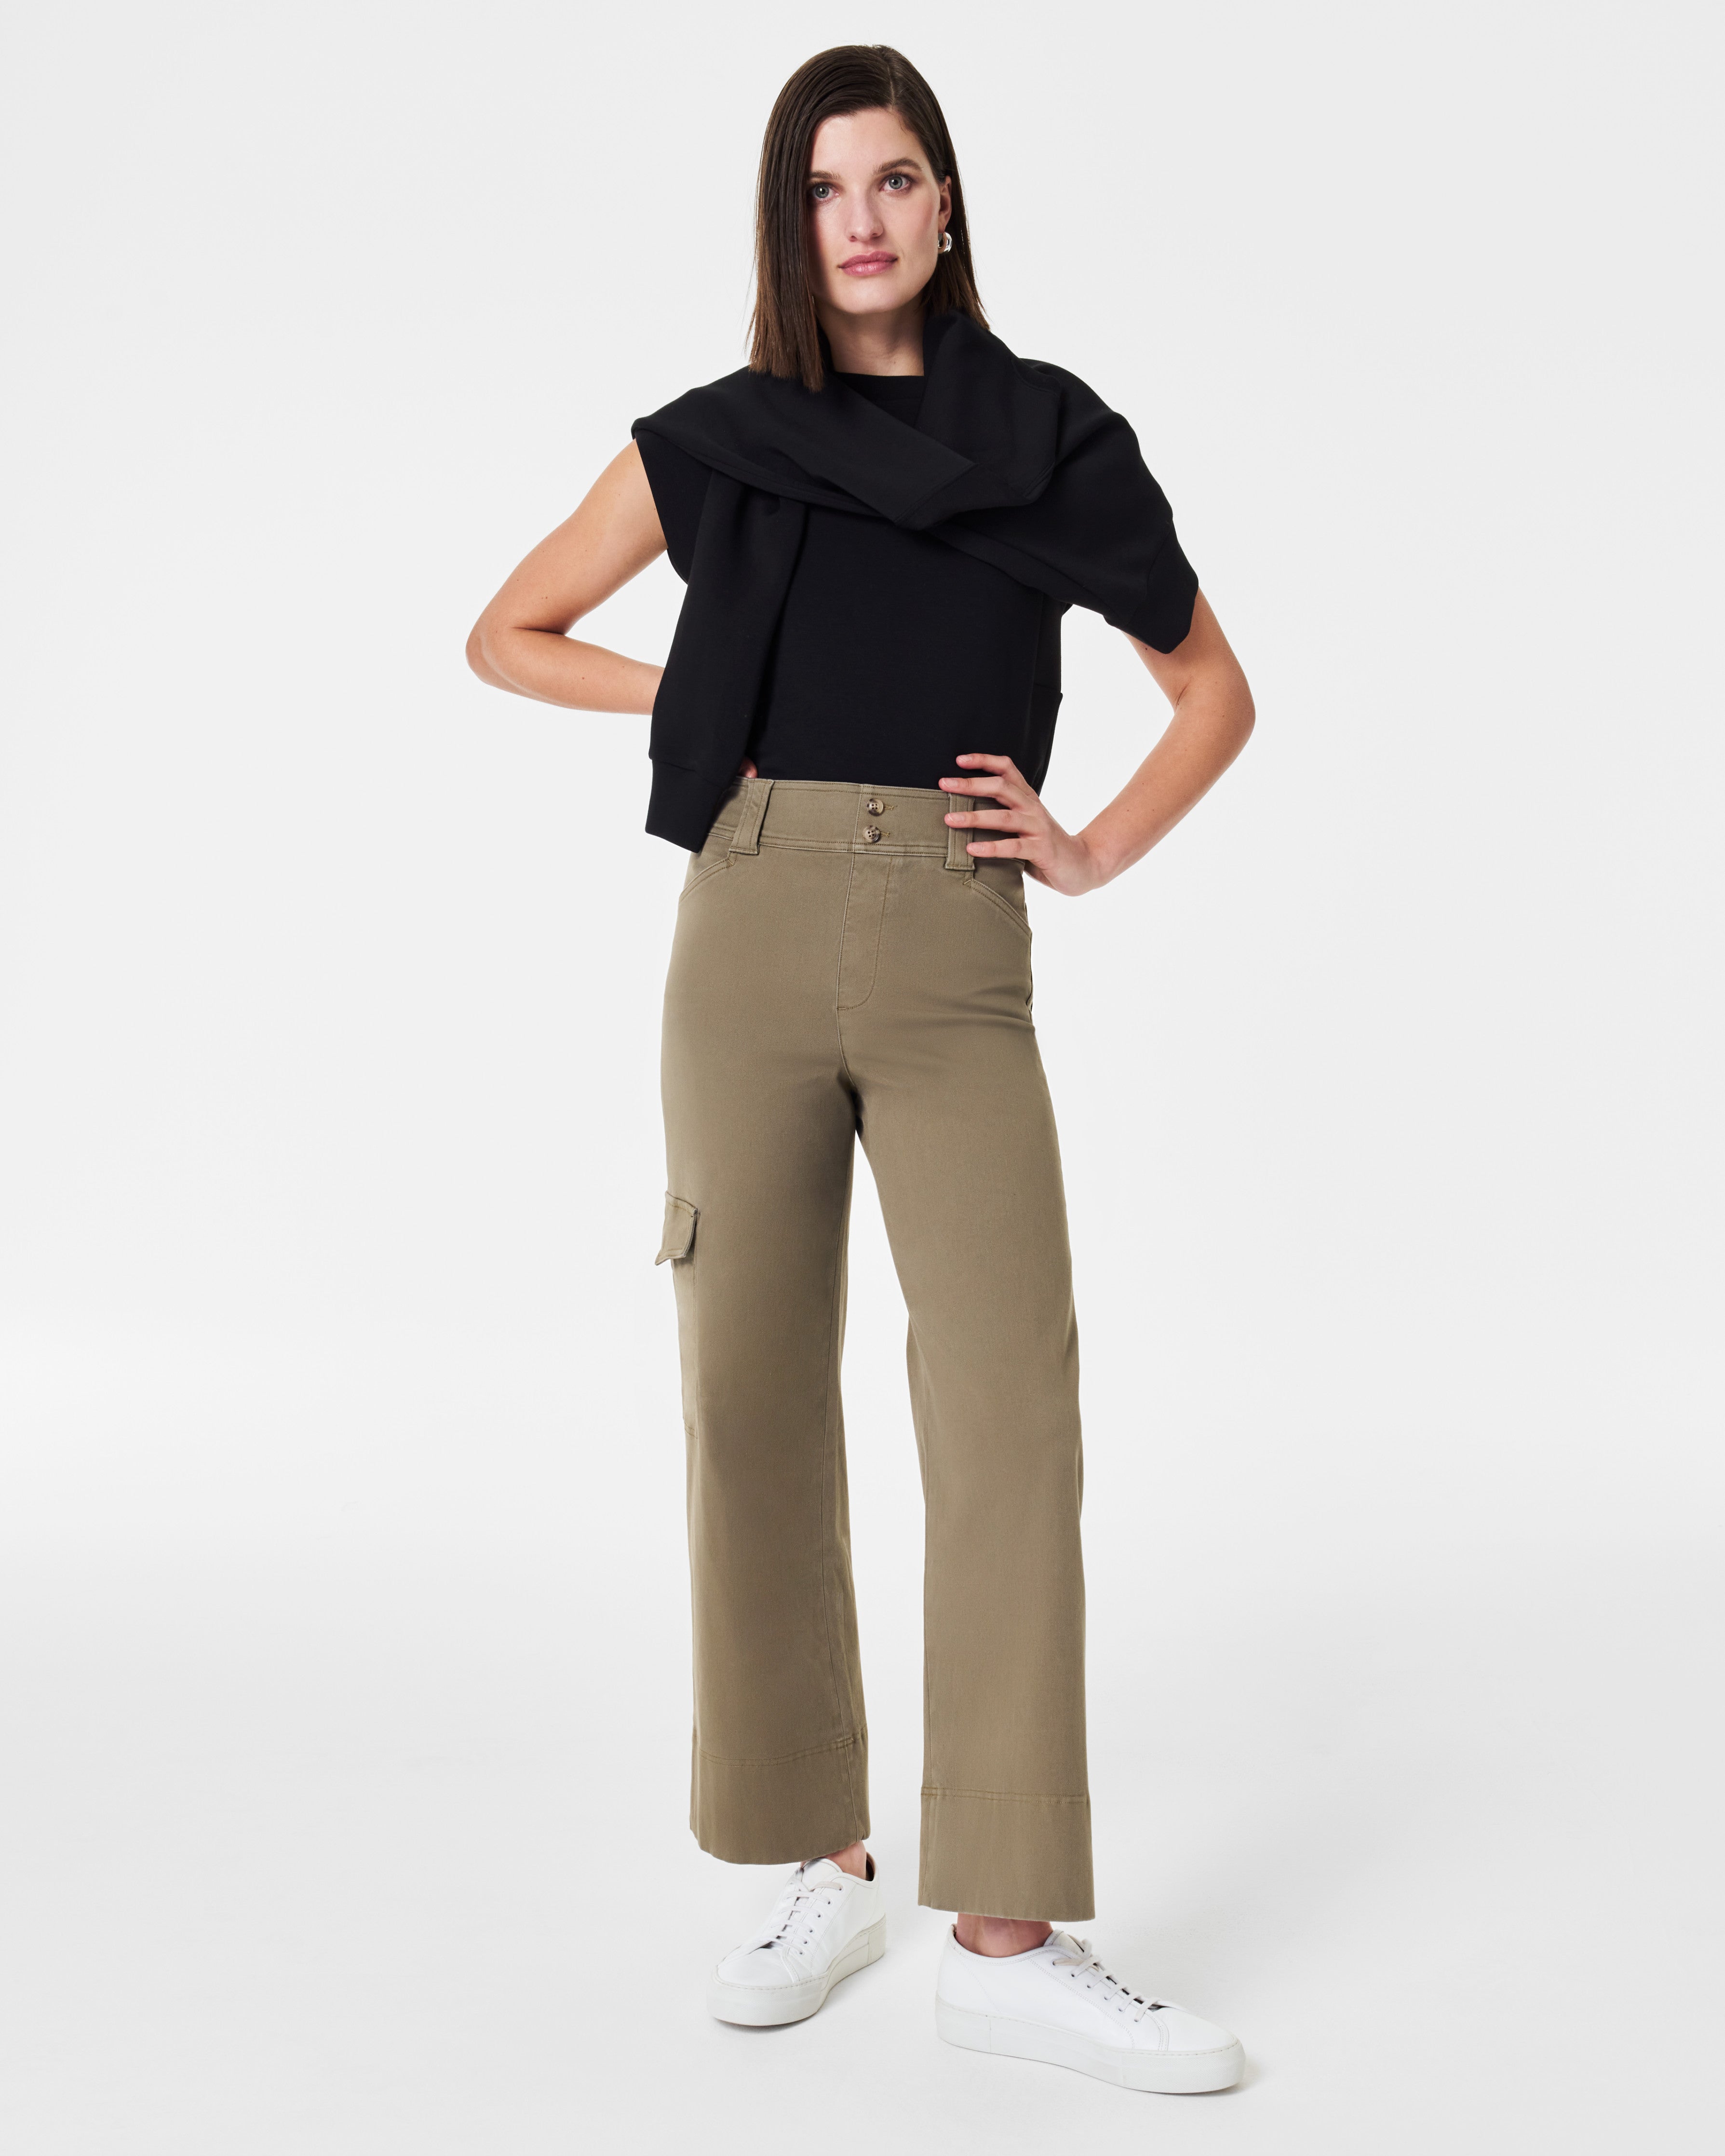 Spanx' Stretch Twill line is back with new pants and shorts for